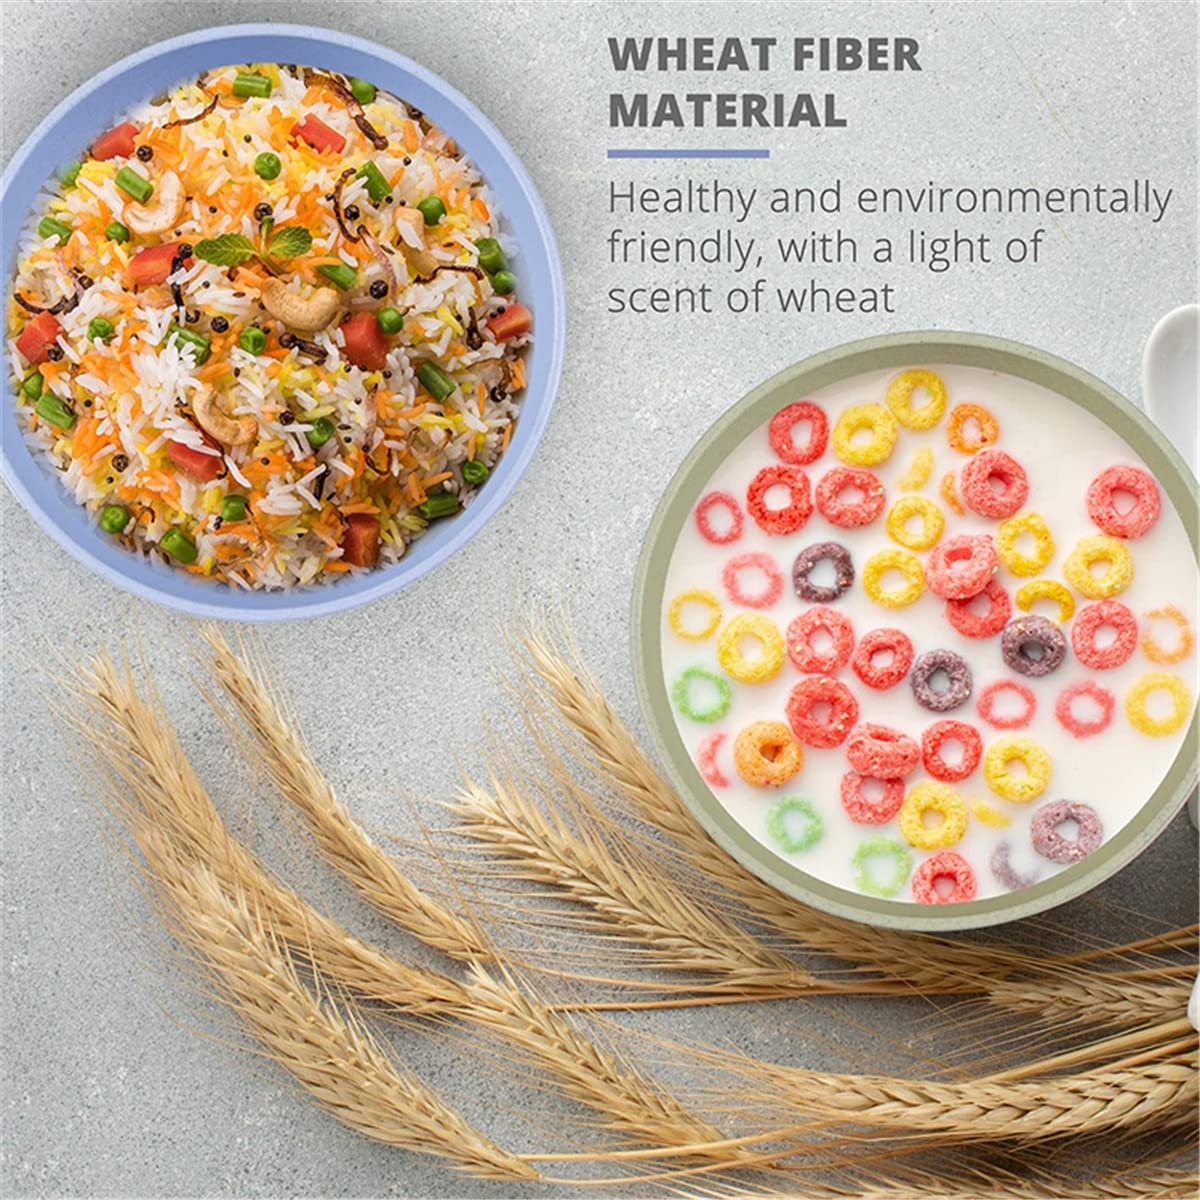 4 Wheats Straw Bowls Stylish Small Bowls Microwave Safe Bowls Set Strong and Unbreakable for Dinner Rice Dessert Snacks Noodles Cereal and More Microwave Freezer and Dishwasher Safe